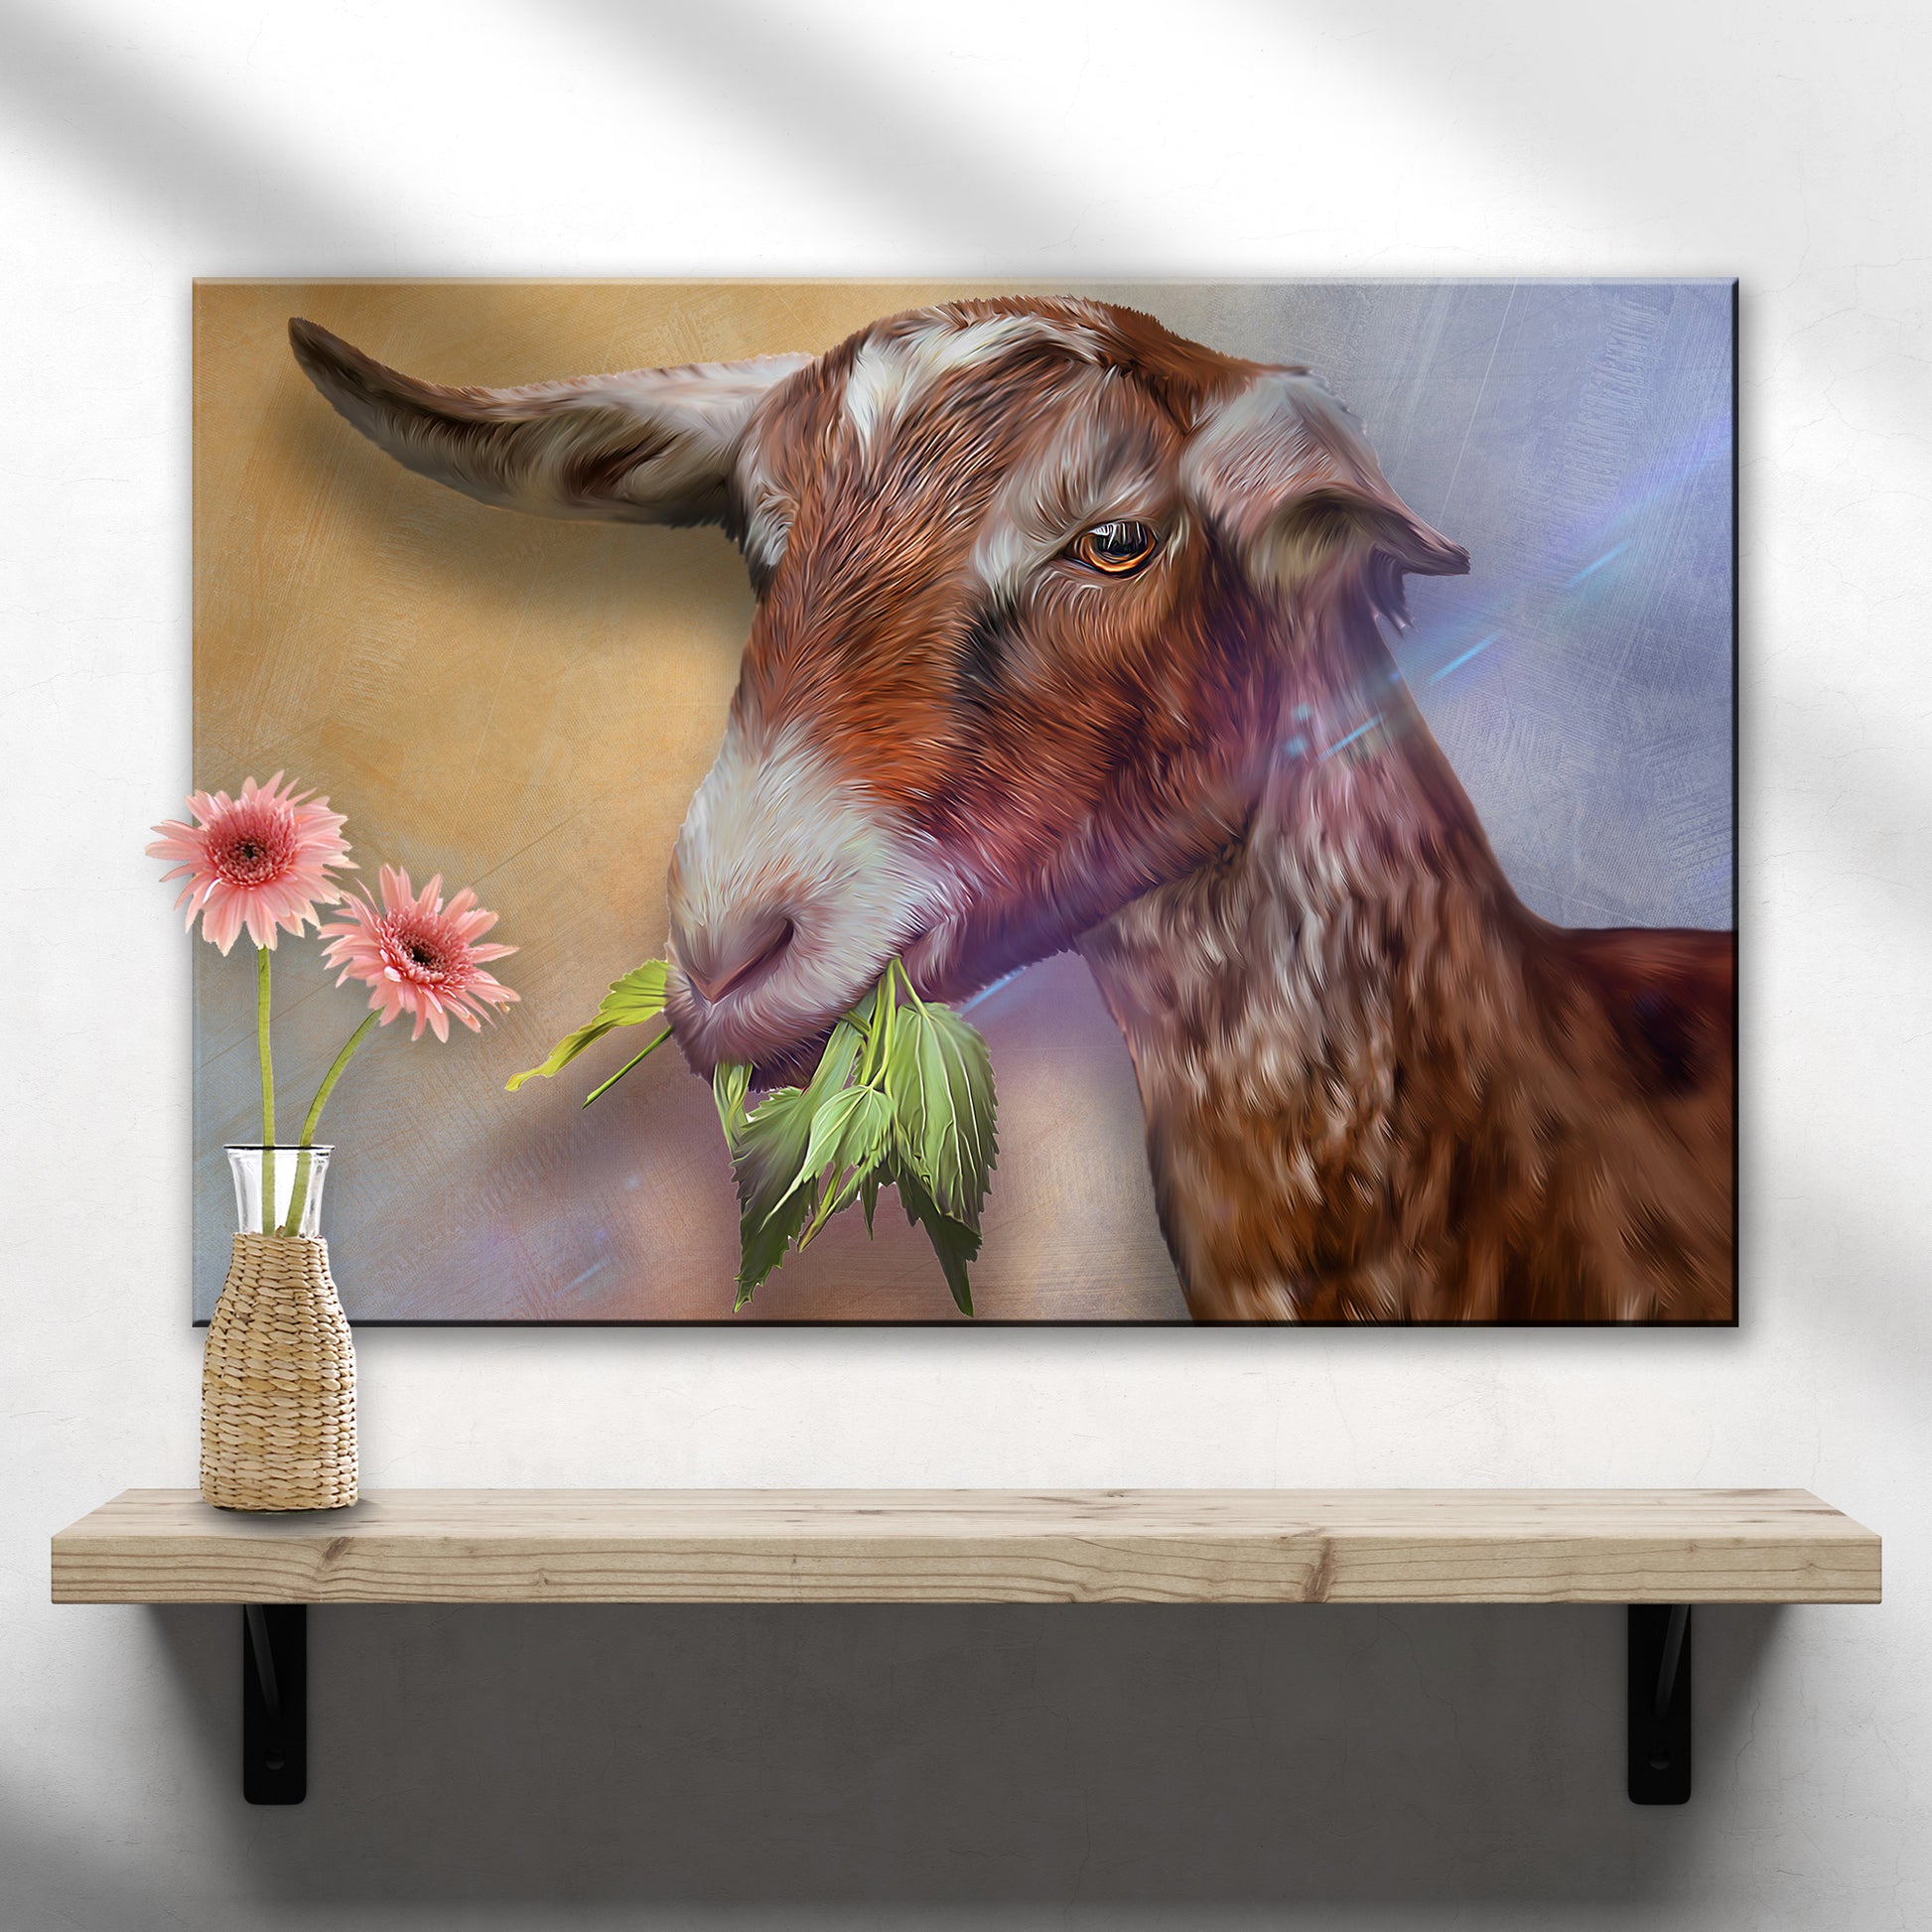 Munching Goat Portrait Canvas Wall Art - Image by Tailored Canvases